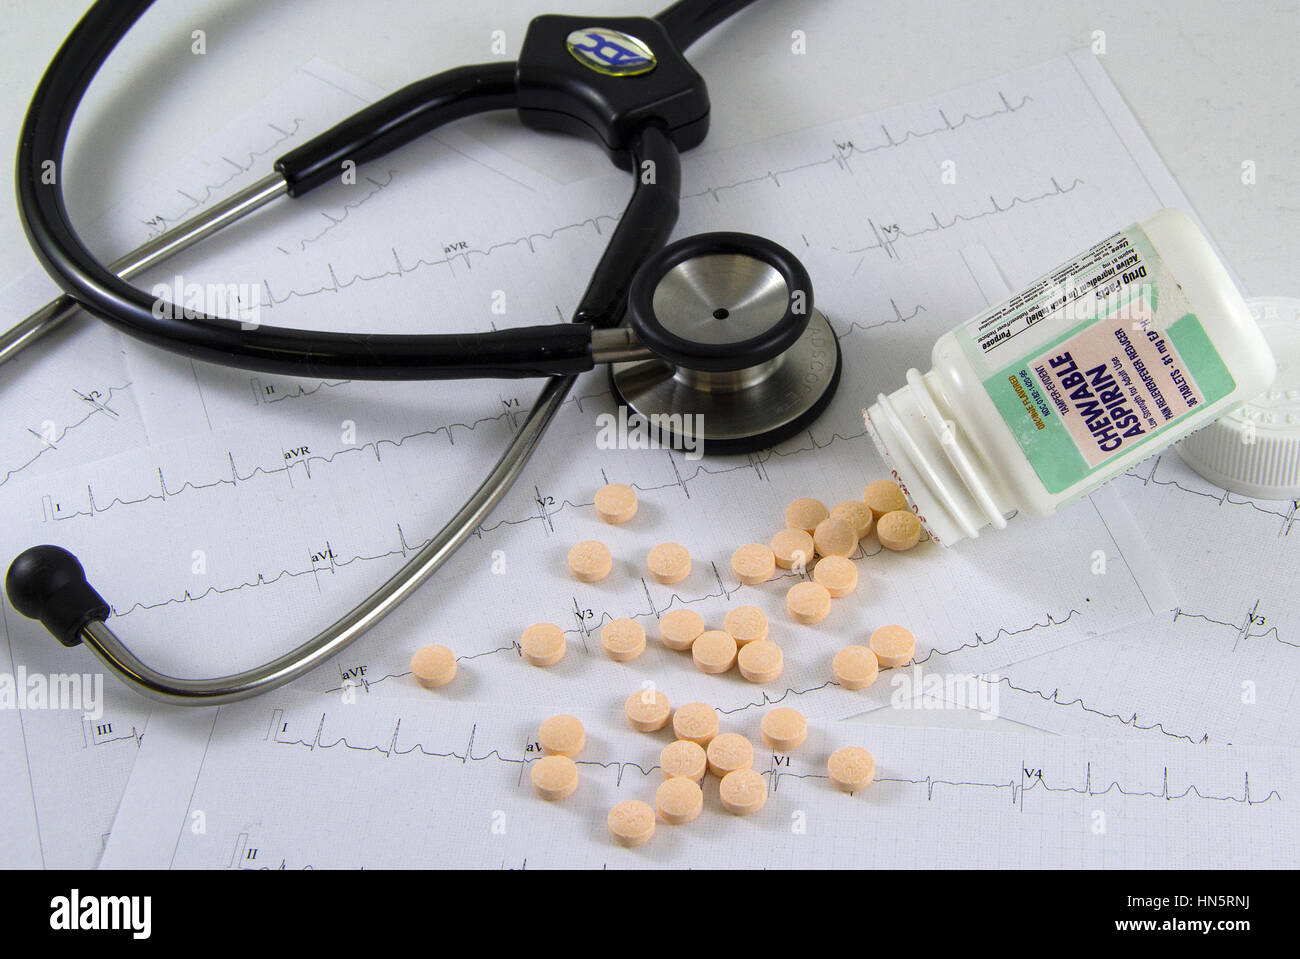 Low dosage aspirin plays a role in prevention of heart attacks and stroke for high risk patients. Stock Photo